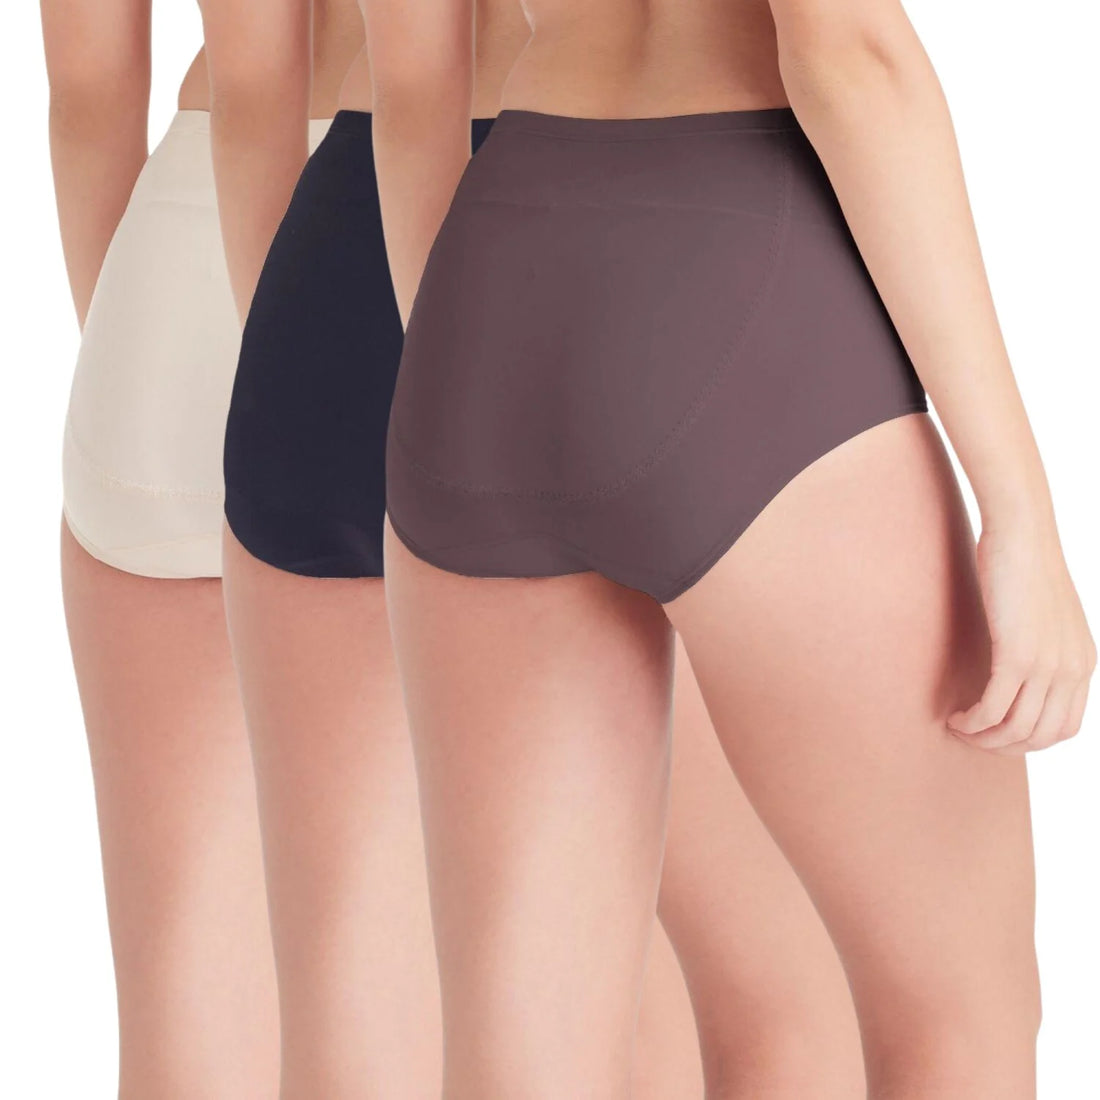 Wacoal U-fit Extra, underwear that does not help to tighten the